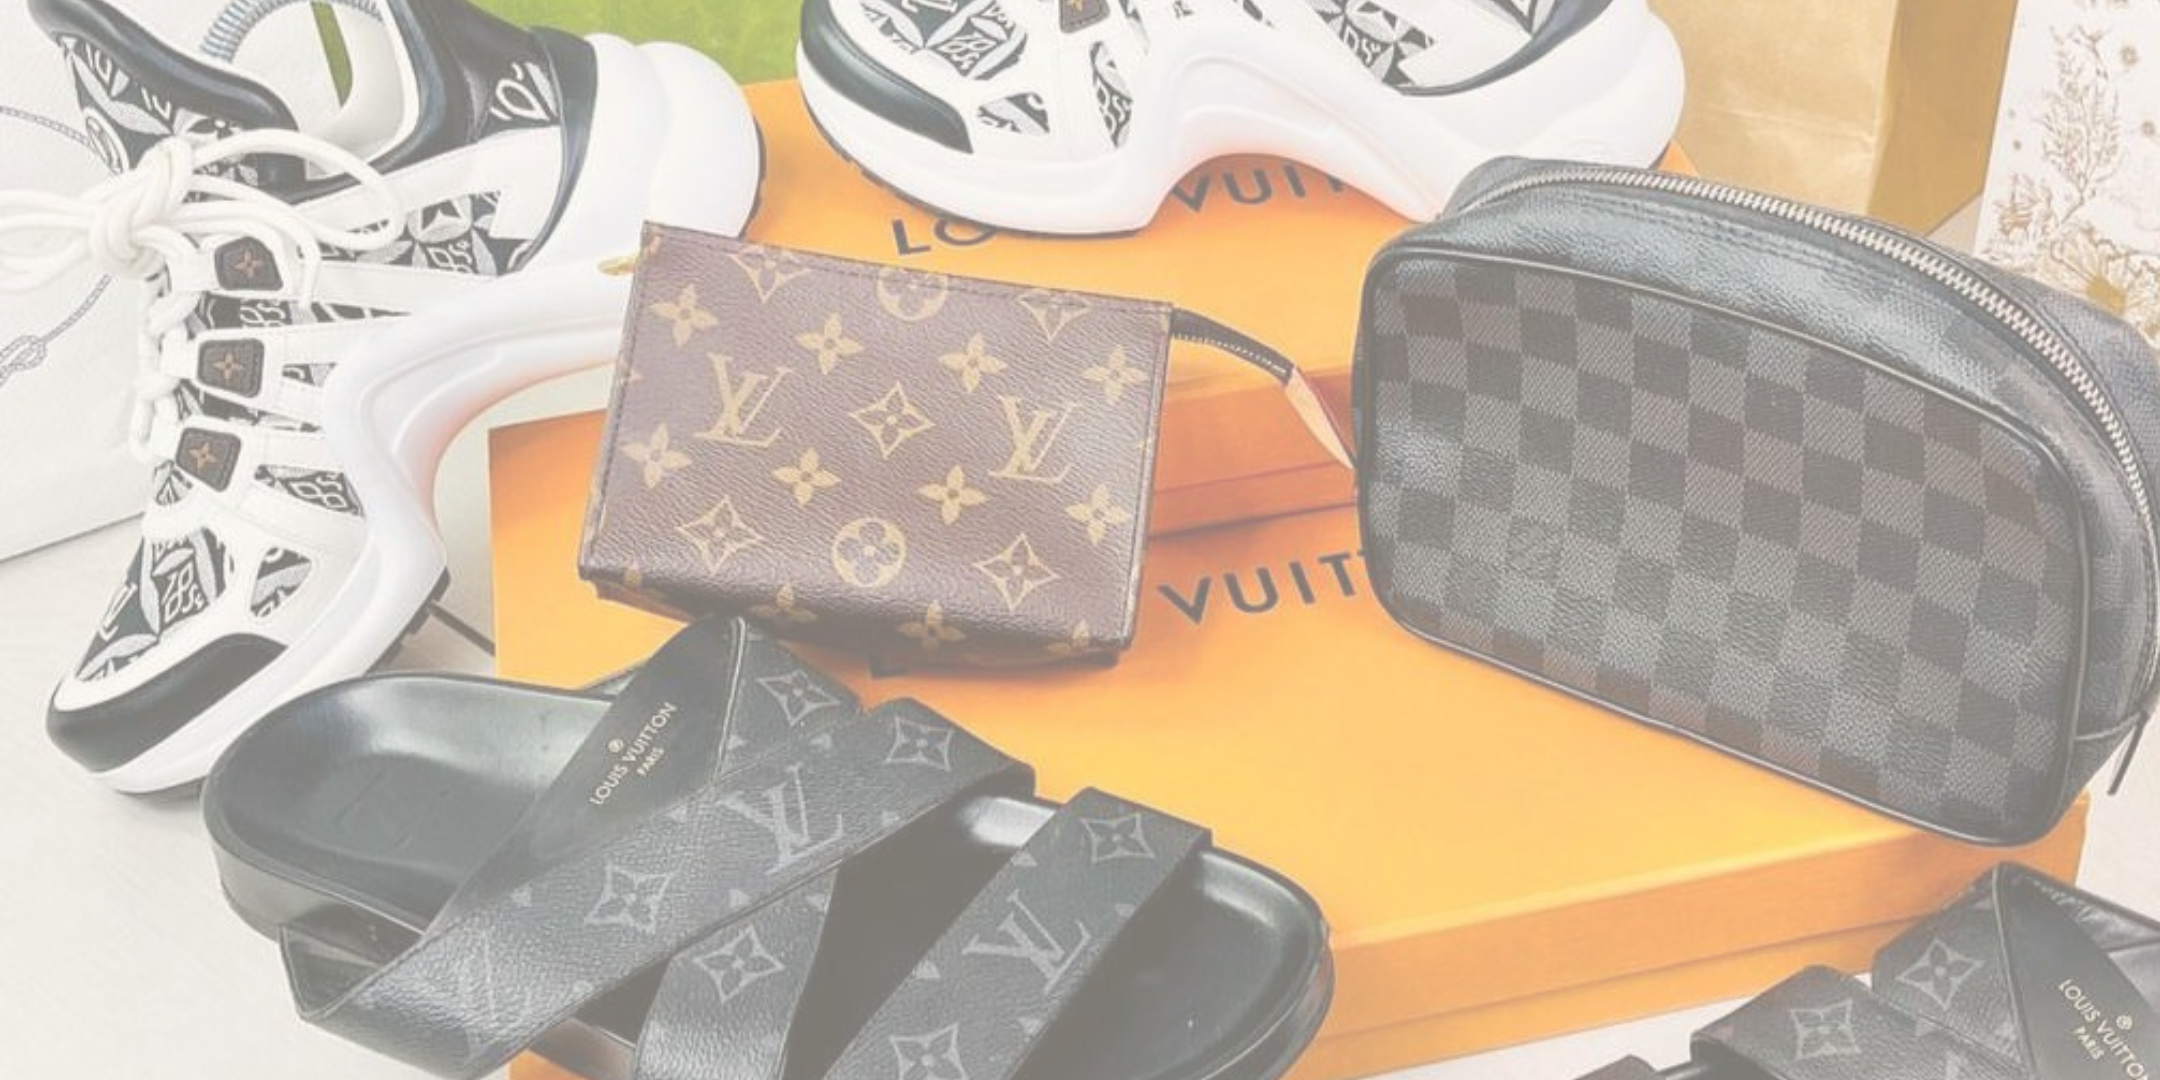 Preloved Louis Vuitton Shoes For Kids Unisex